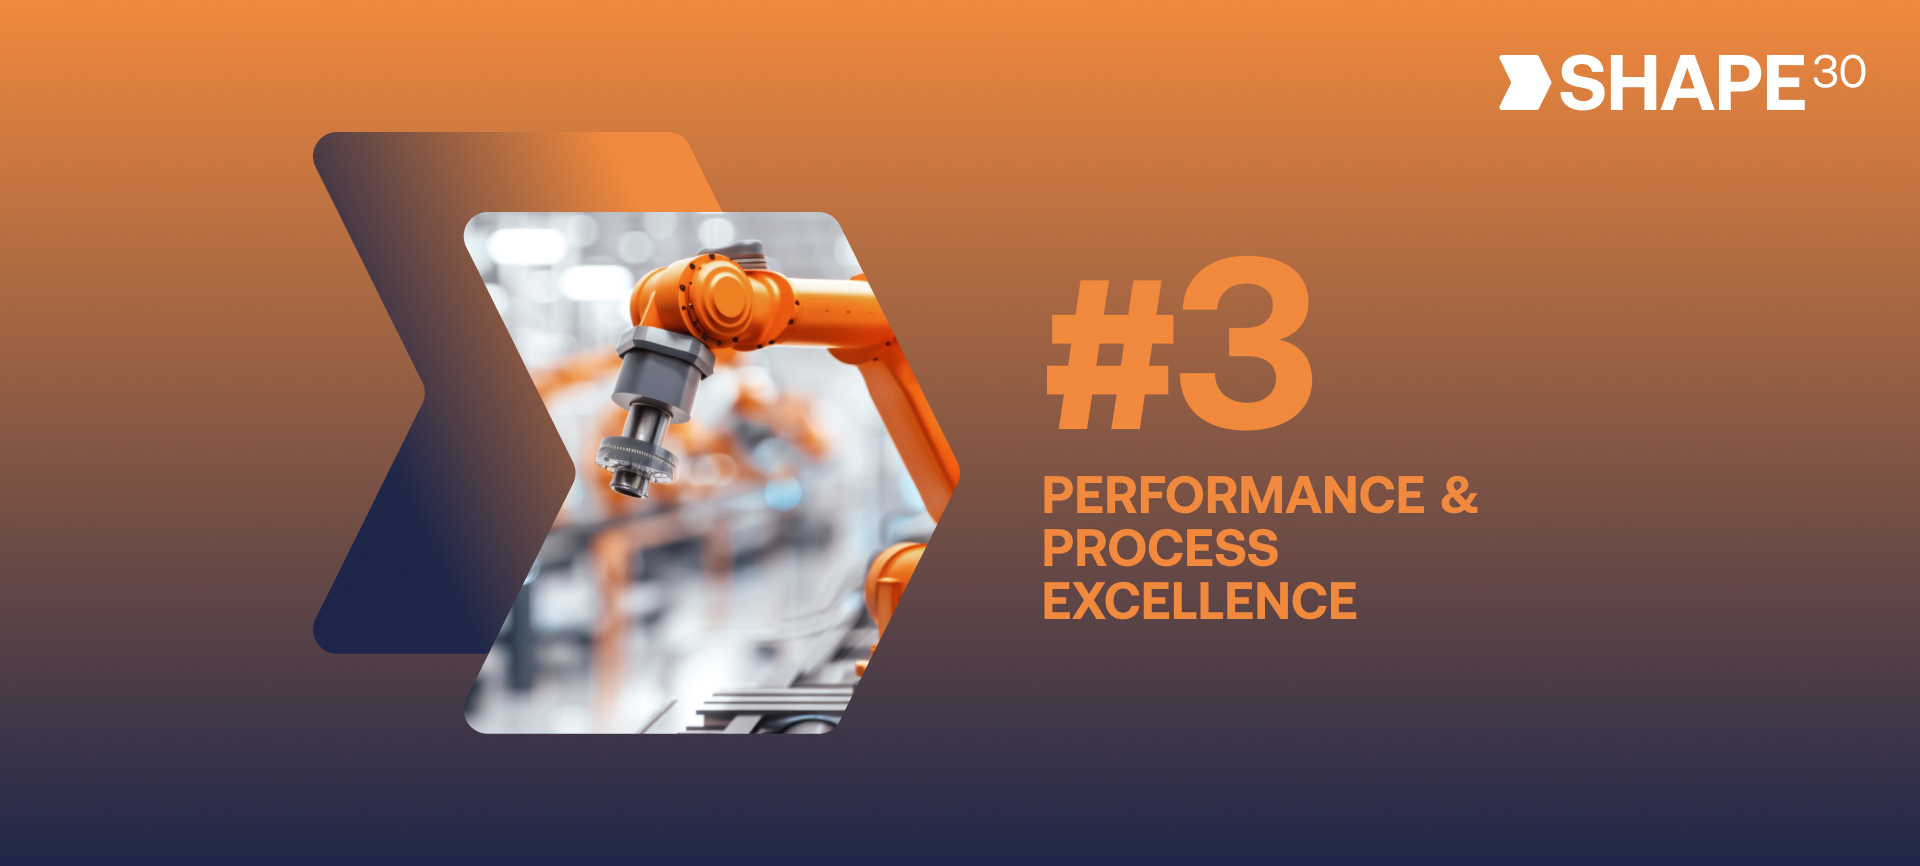 Performance & process excellence